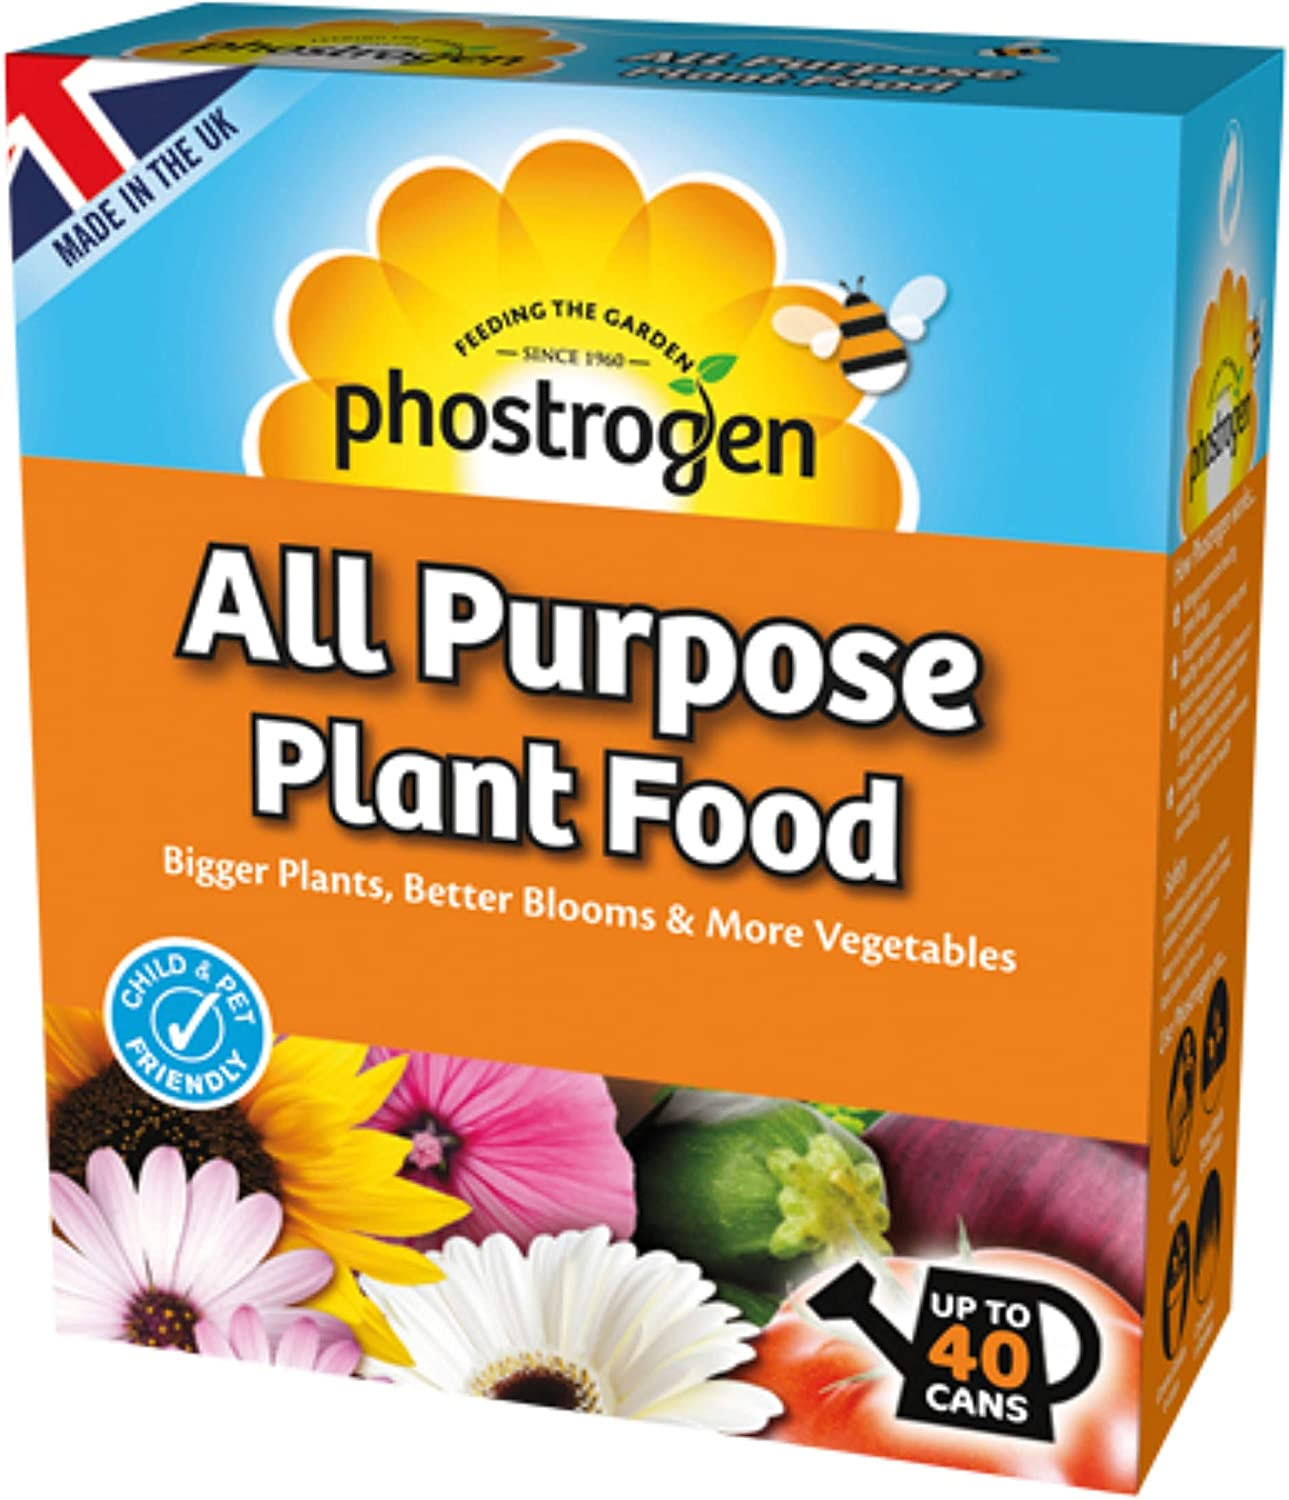 Phostrogen All Purpose Plant Food - 40 Cans